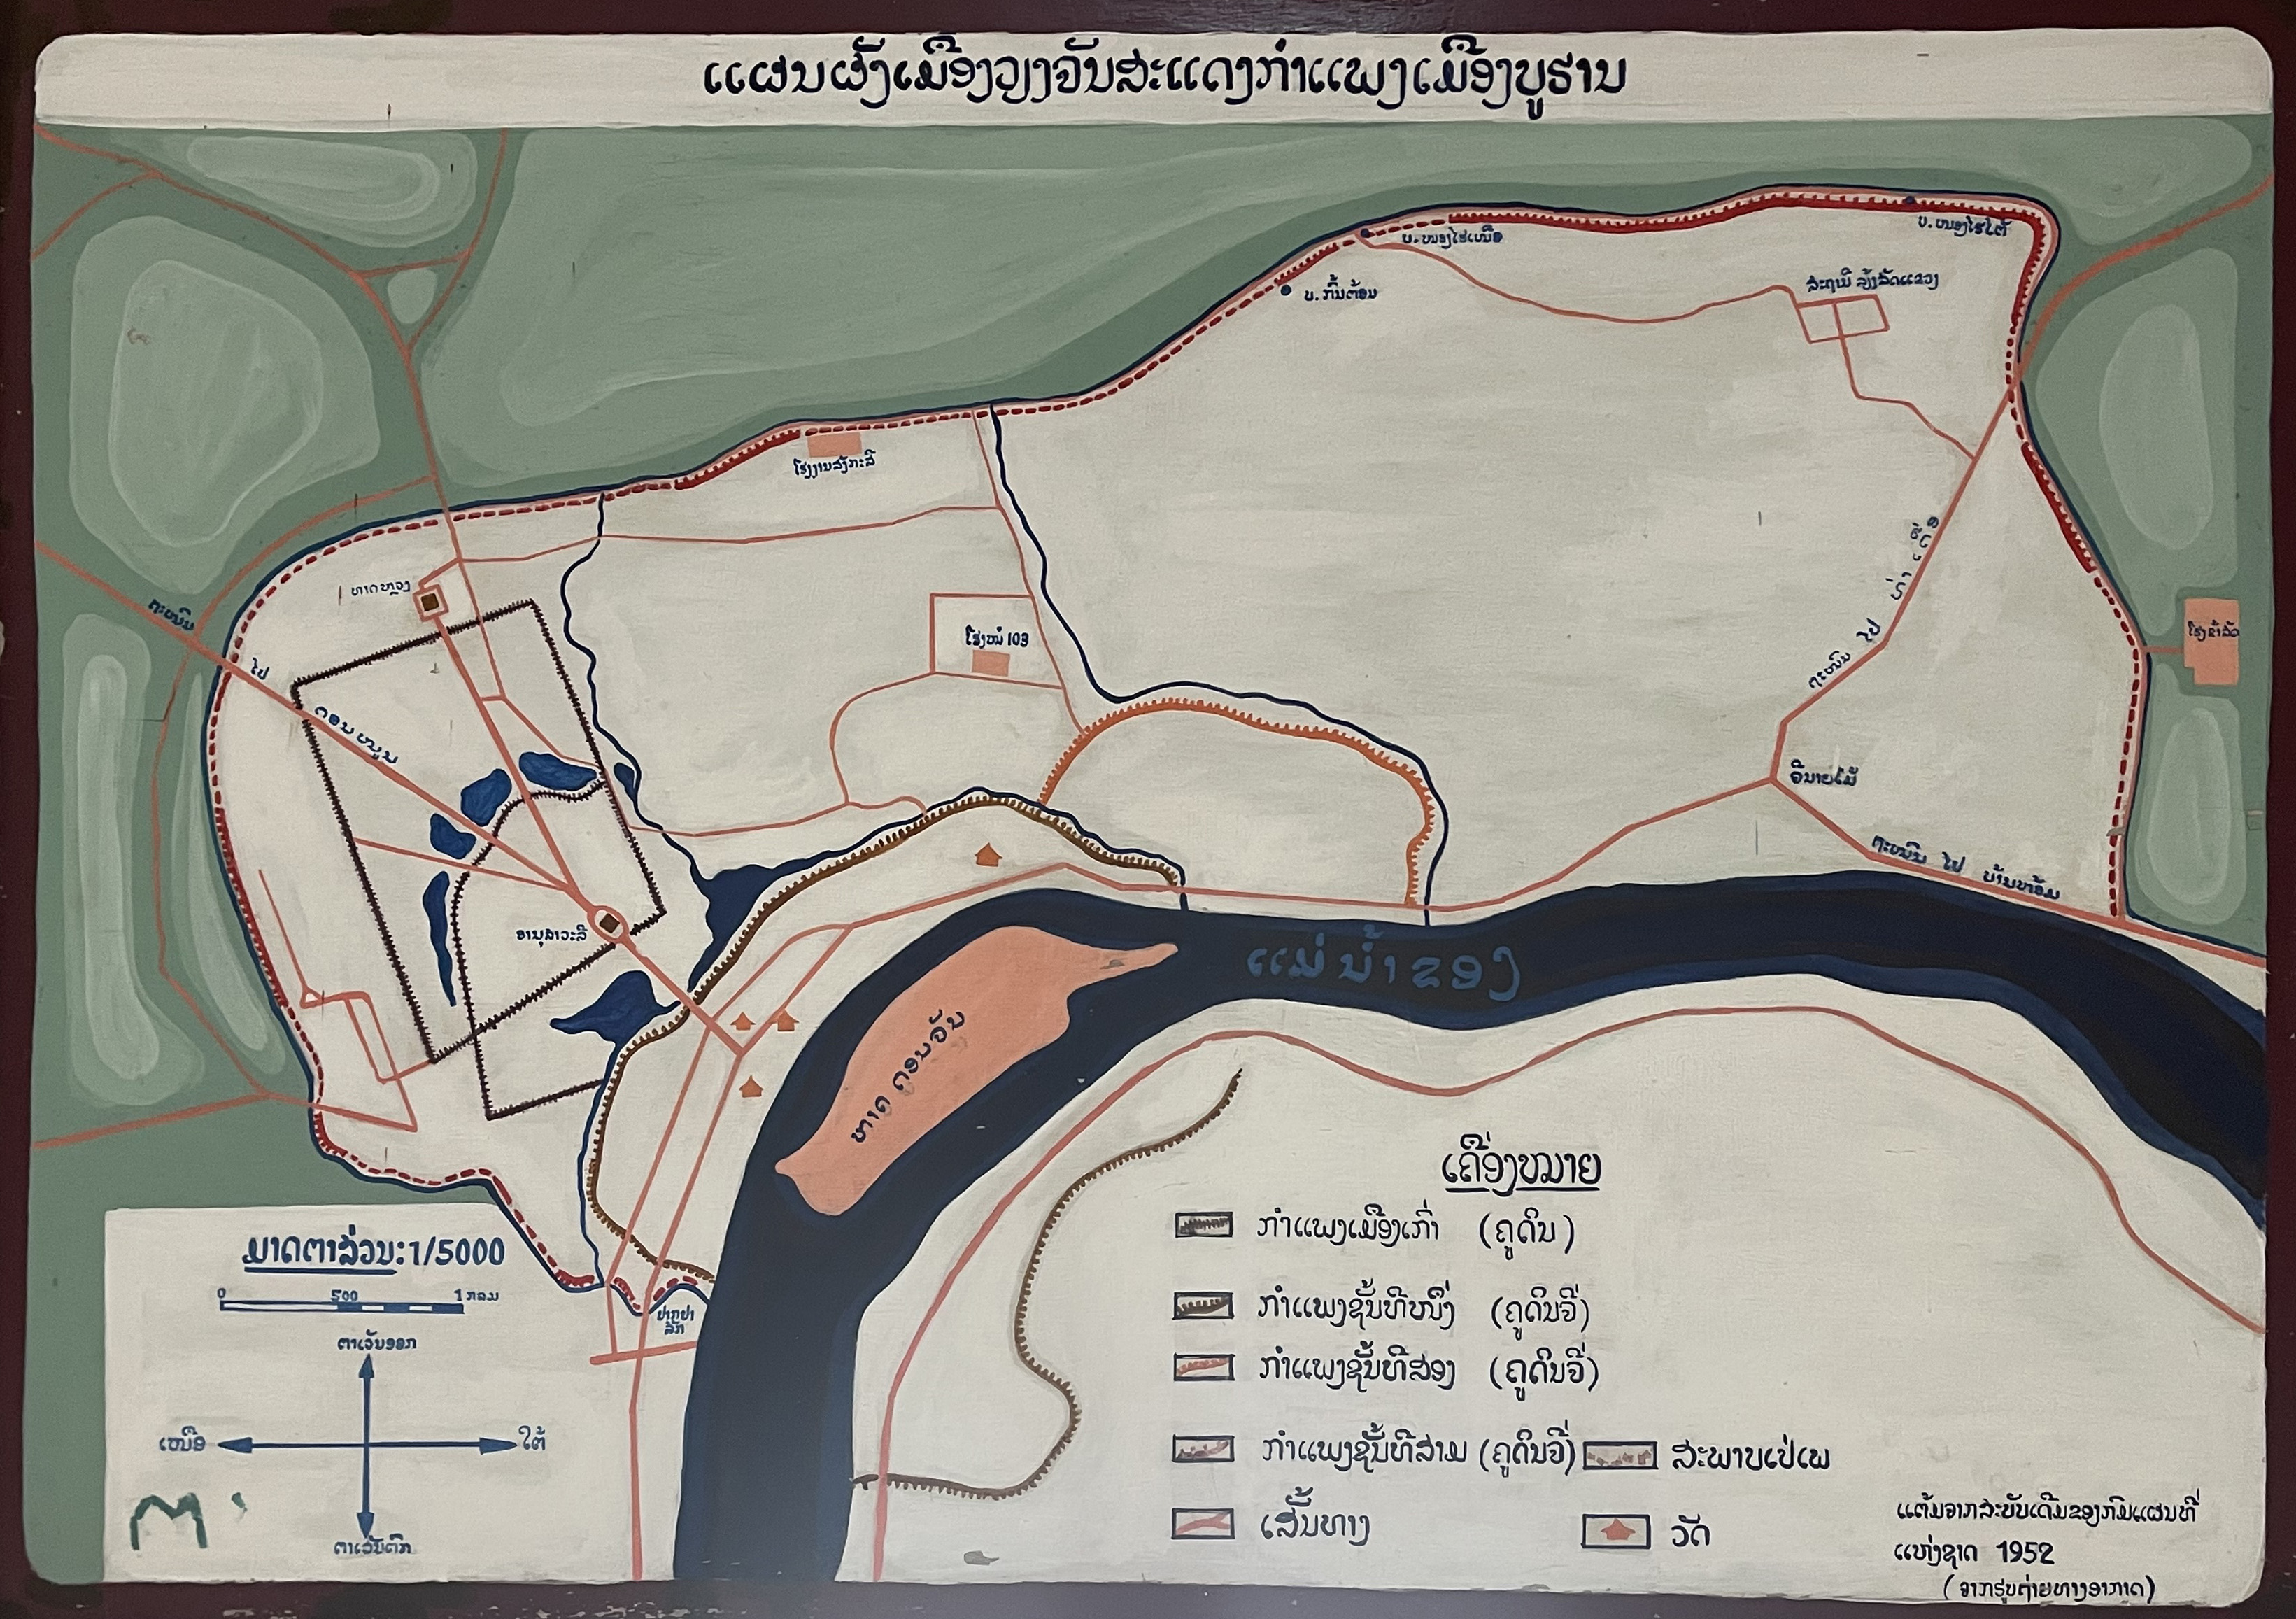 03 Illustrated map of the city walls having protected the Vientiane Capital of the Lanxang Kingdom 